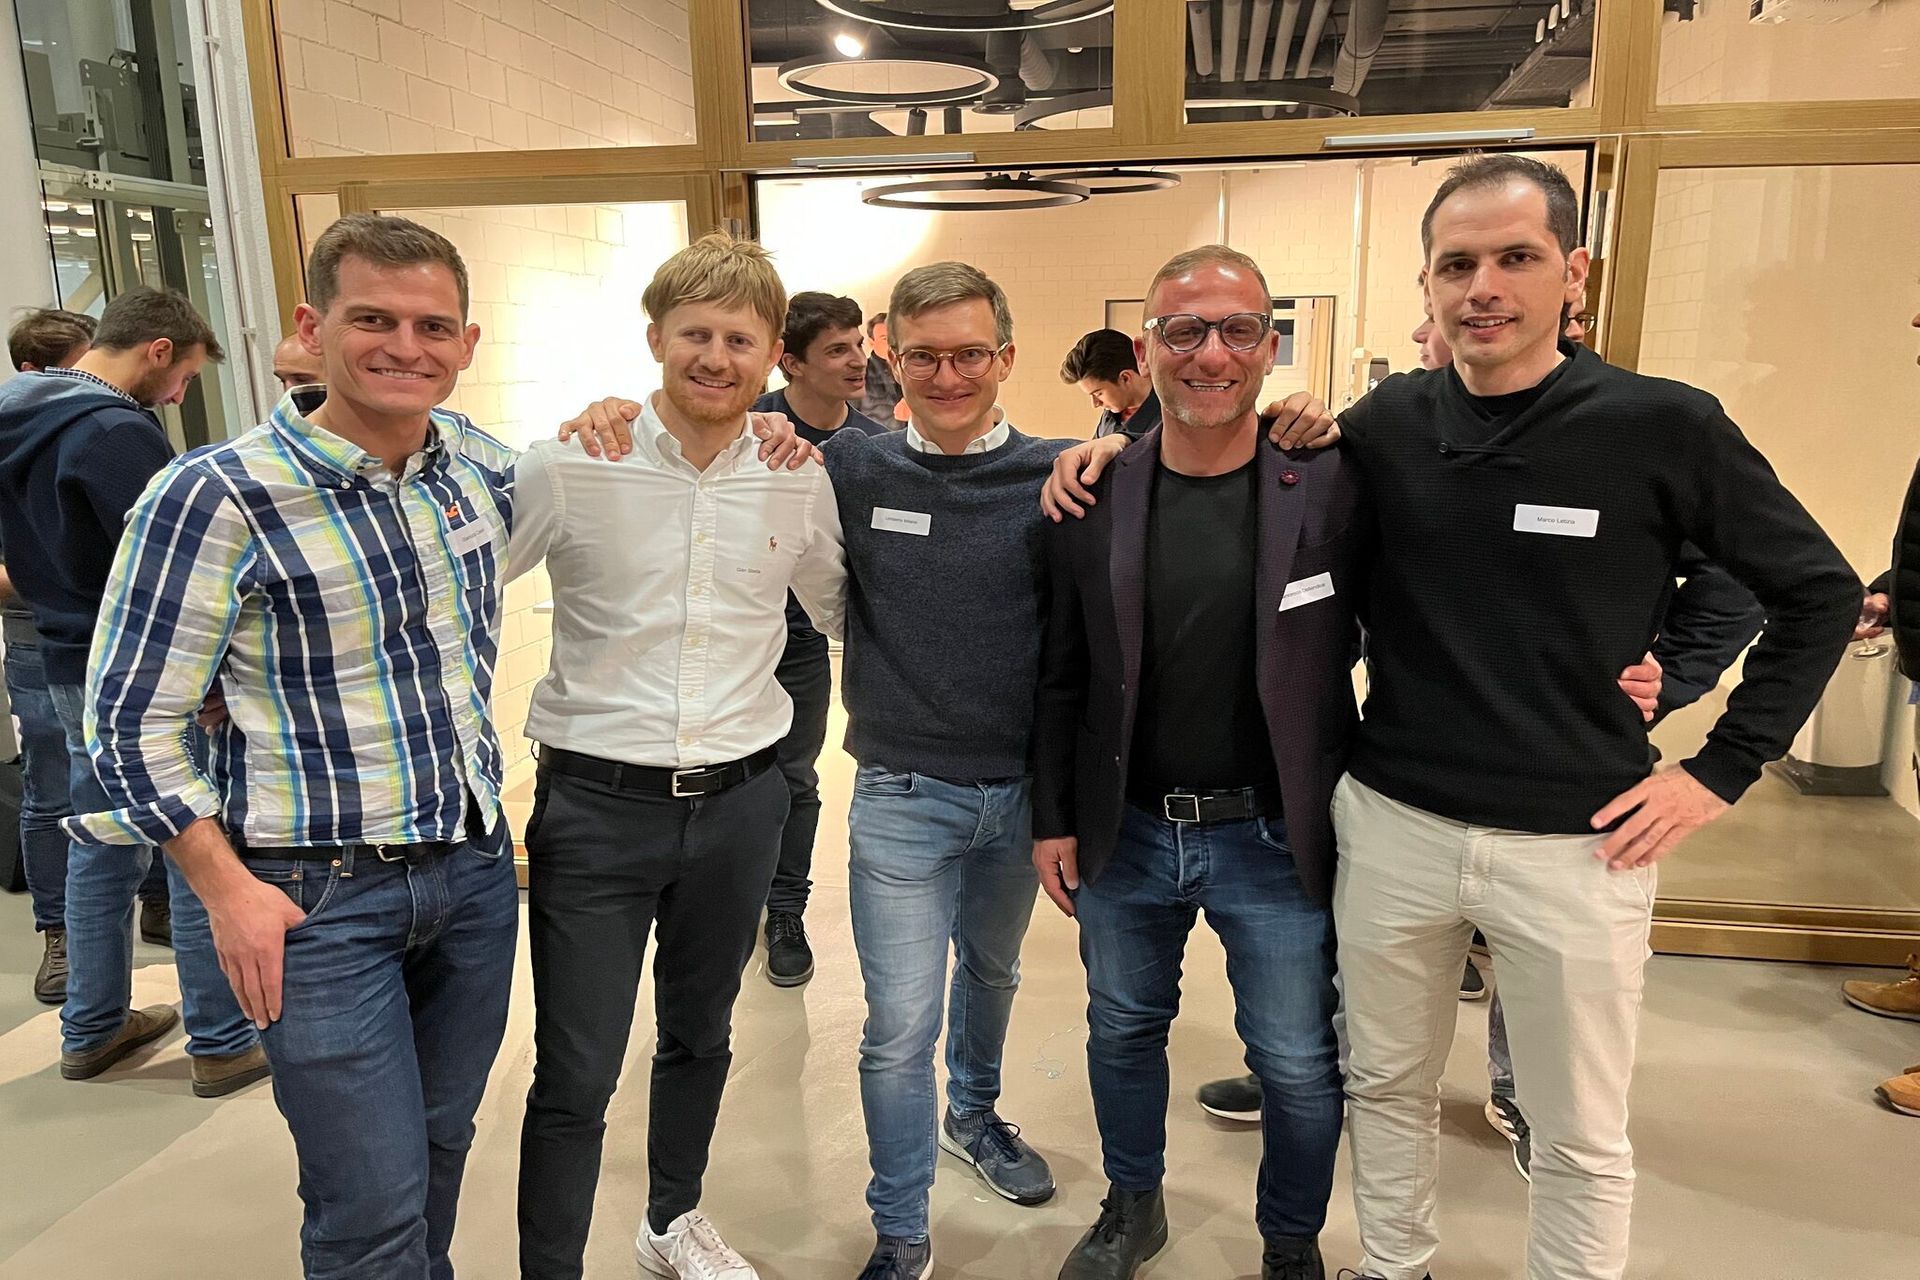 The first edition of the "Italian Tech Night", organized by the #pizzatech association, took place on the evening of 24 March 2022 at the Startup Space by IFJ in Schlieren, near Zurich: the founders of #pizzatech, Gianluca Cesari, Gianmaria Sbetta, Umberto Milano, Francesco Dell'Endice and Marco Letizia